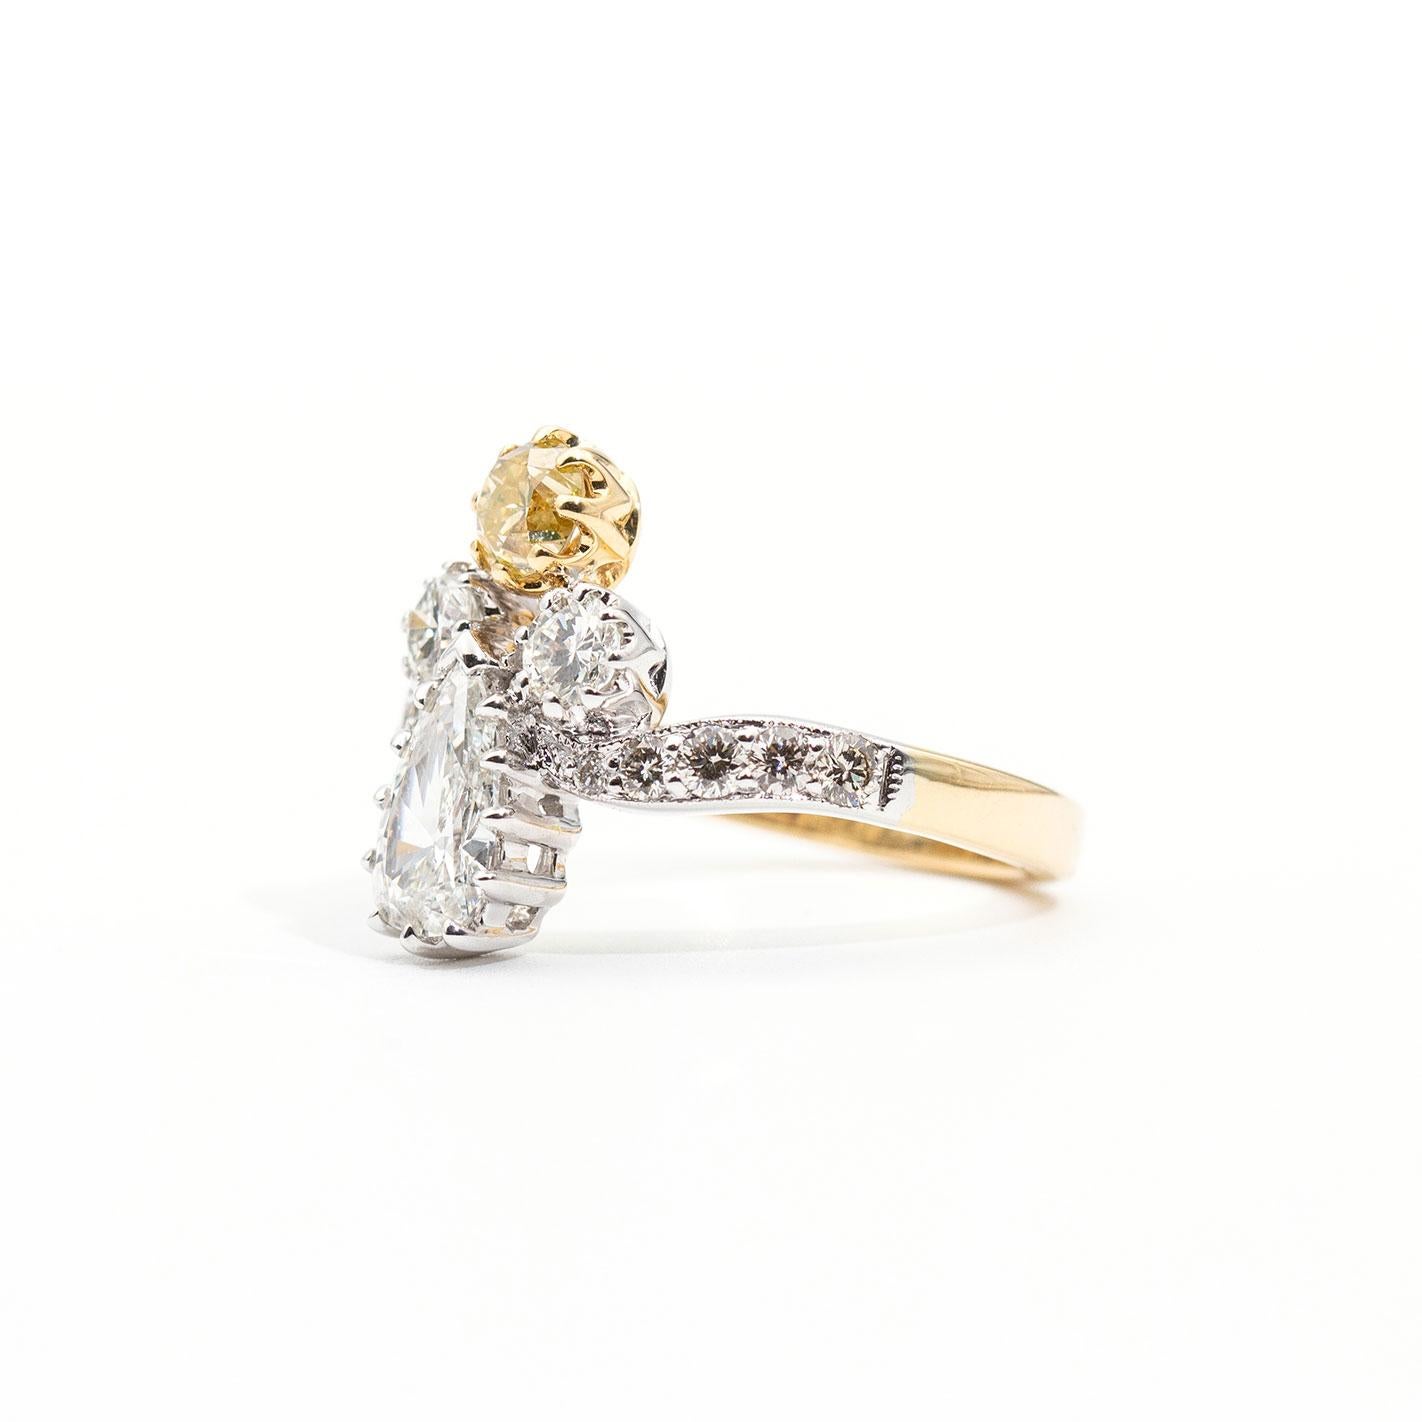 This alluring vintage inspired ring is forged in 18 carat white and yellow gold and features a stunning certified 0.70 carat pear shape diamond with an eye-catching certified natural light fancy yellow round brilliant cut diamond complimented by two